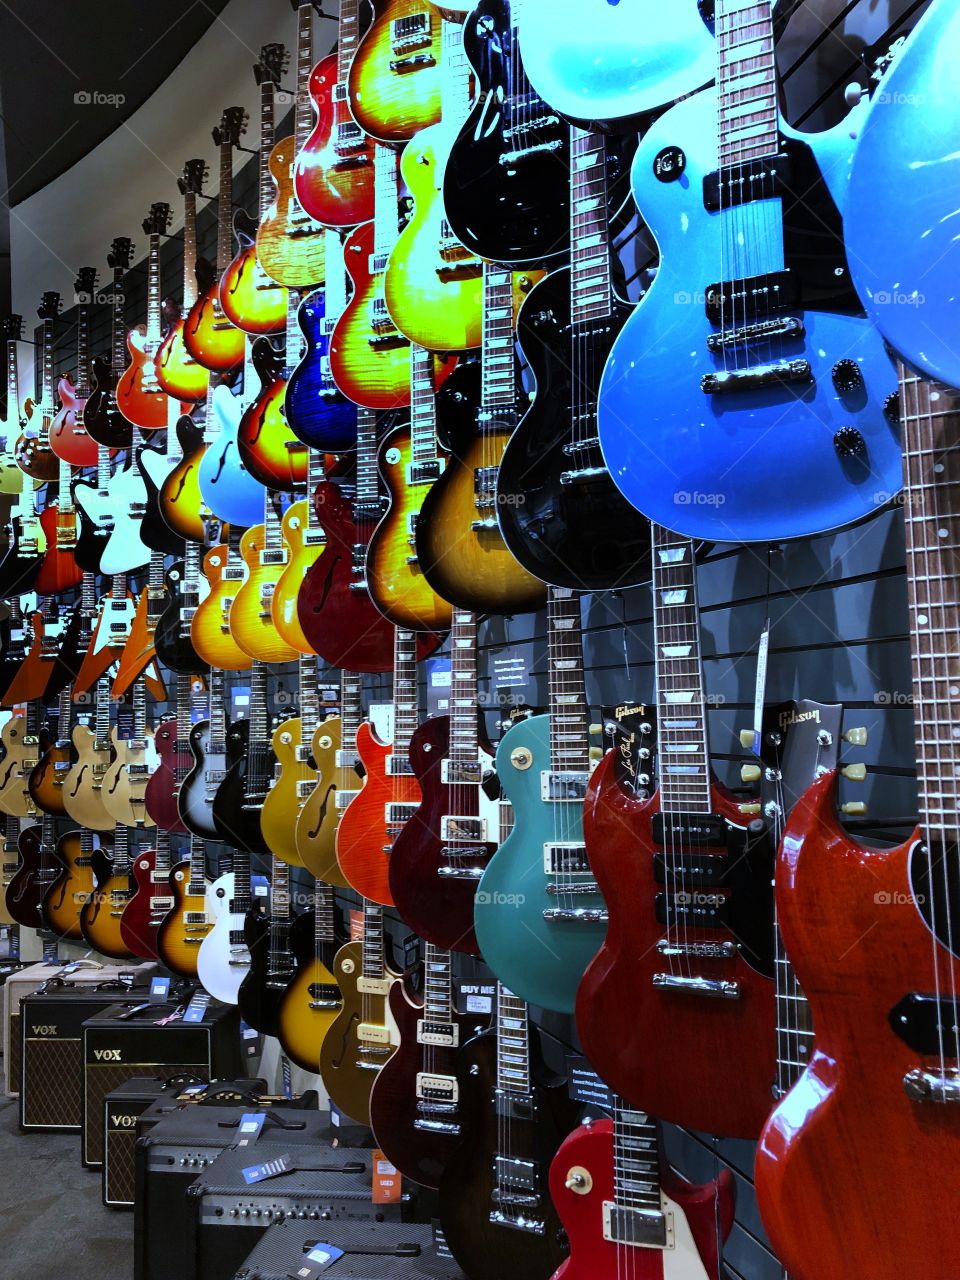 An electric guitarists playground. A colourful line up of beautiful electric guitars. Grab a pick and take your pick and rock on! 